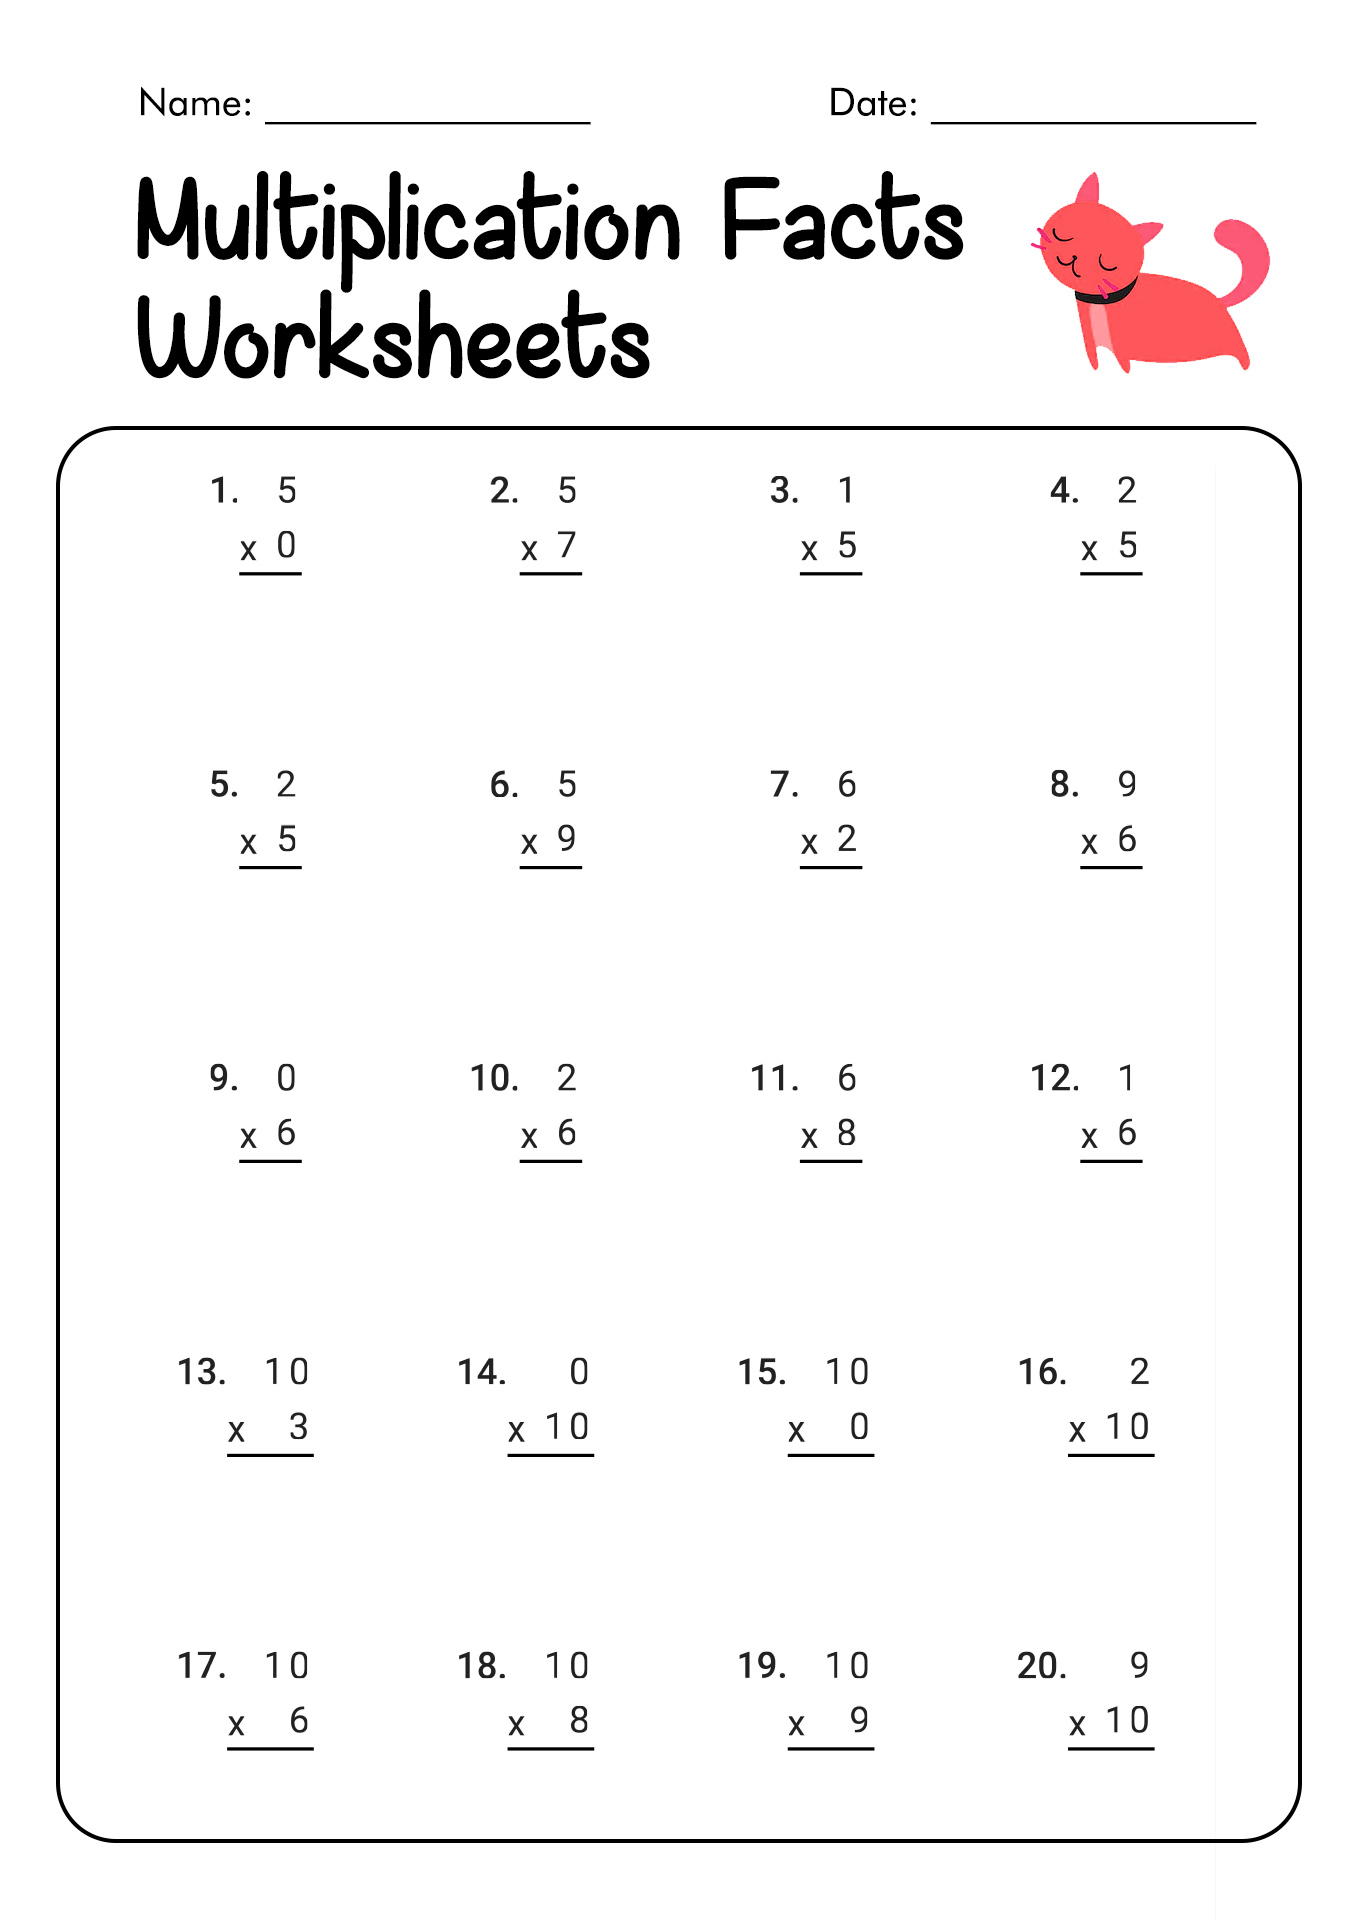 multiplication-facts-worksheets-3s